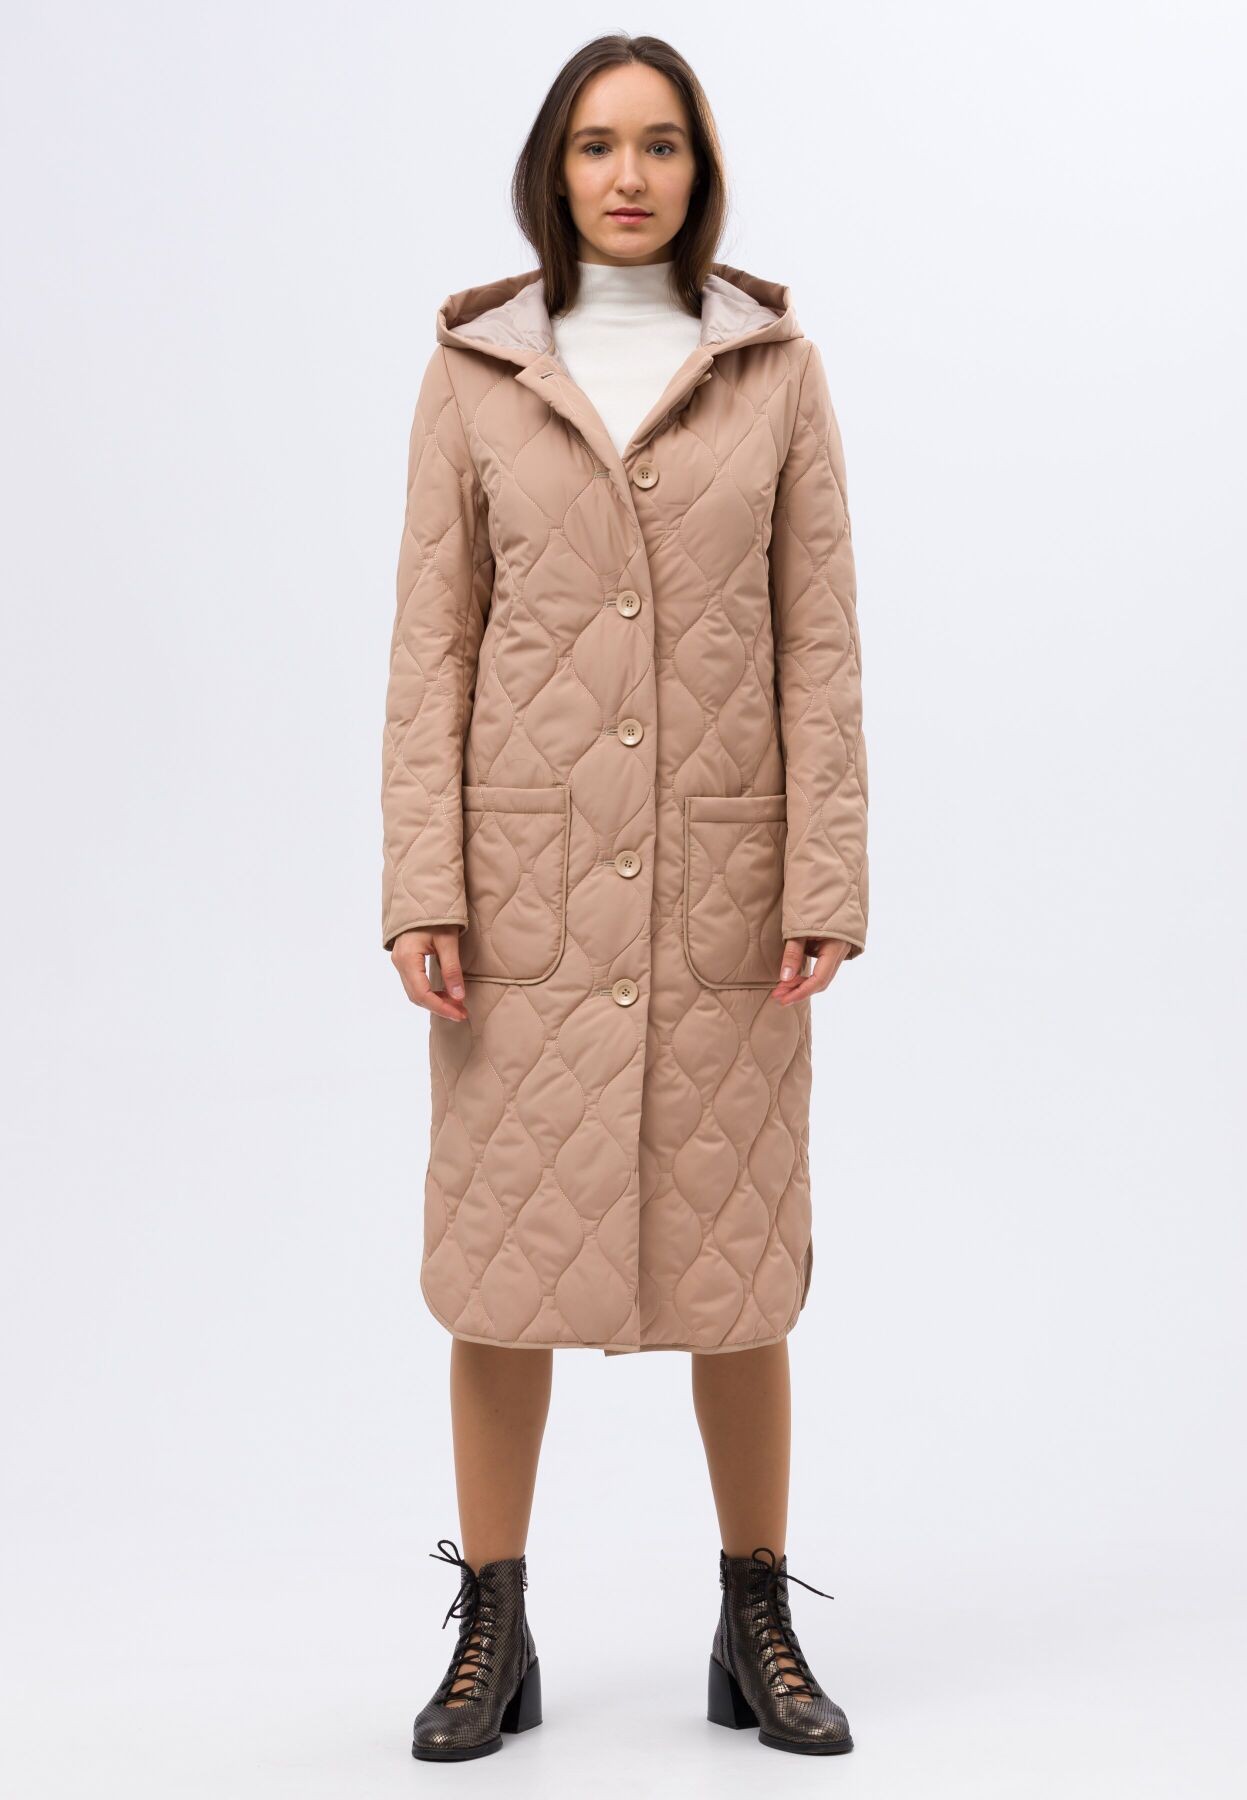 Warm quilted coat in beige shade 4421c